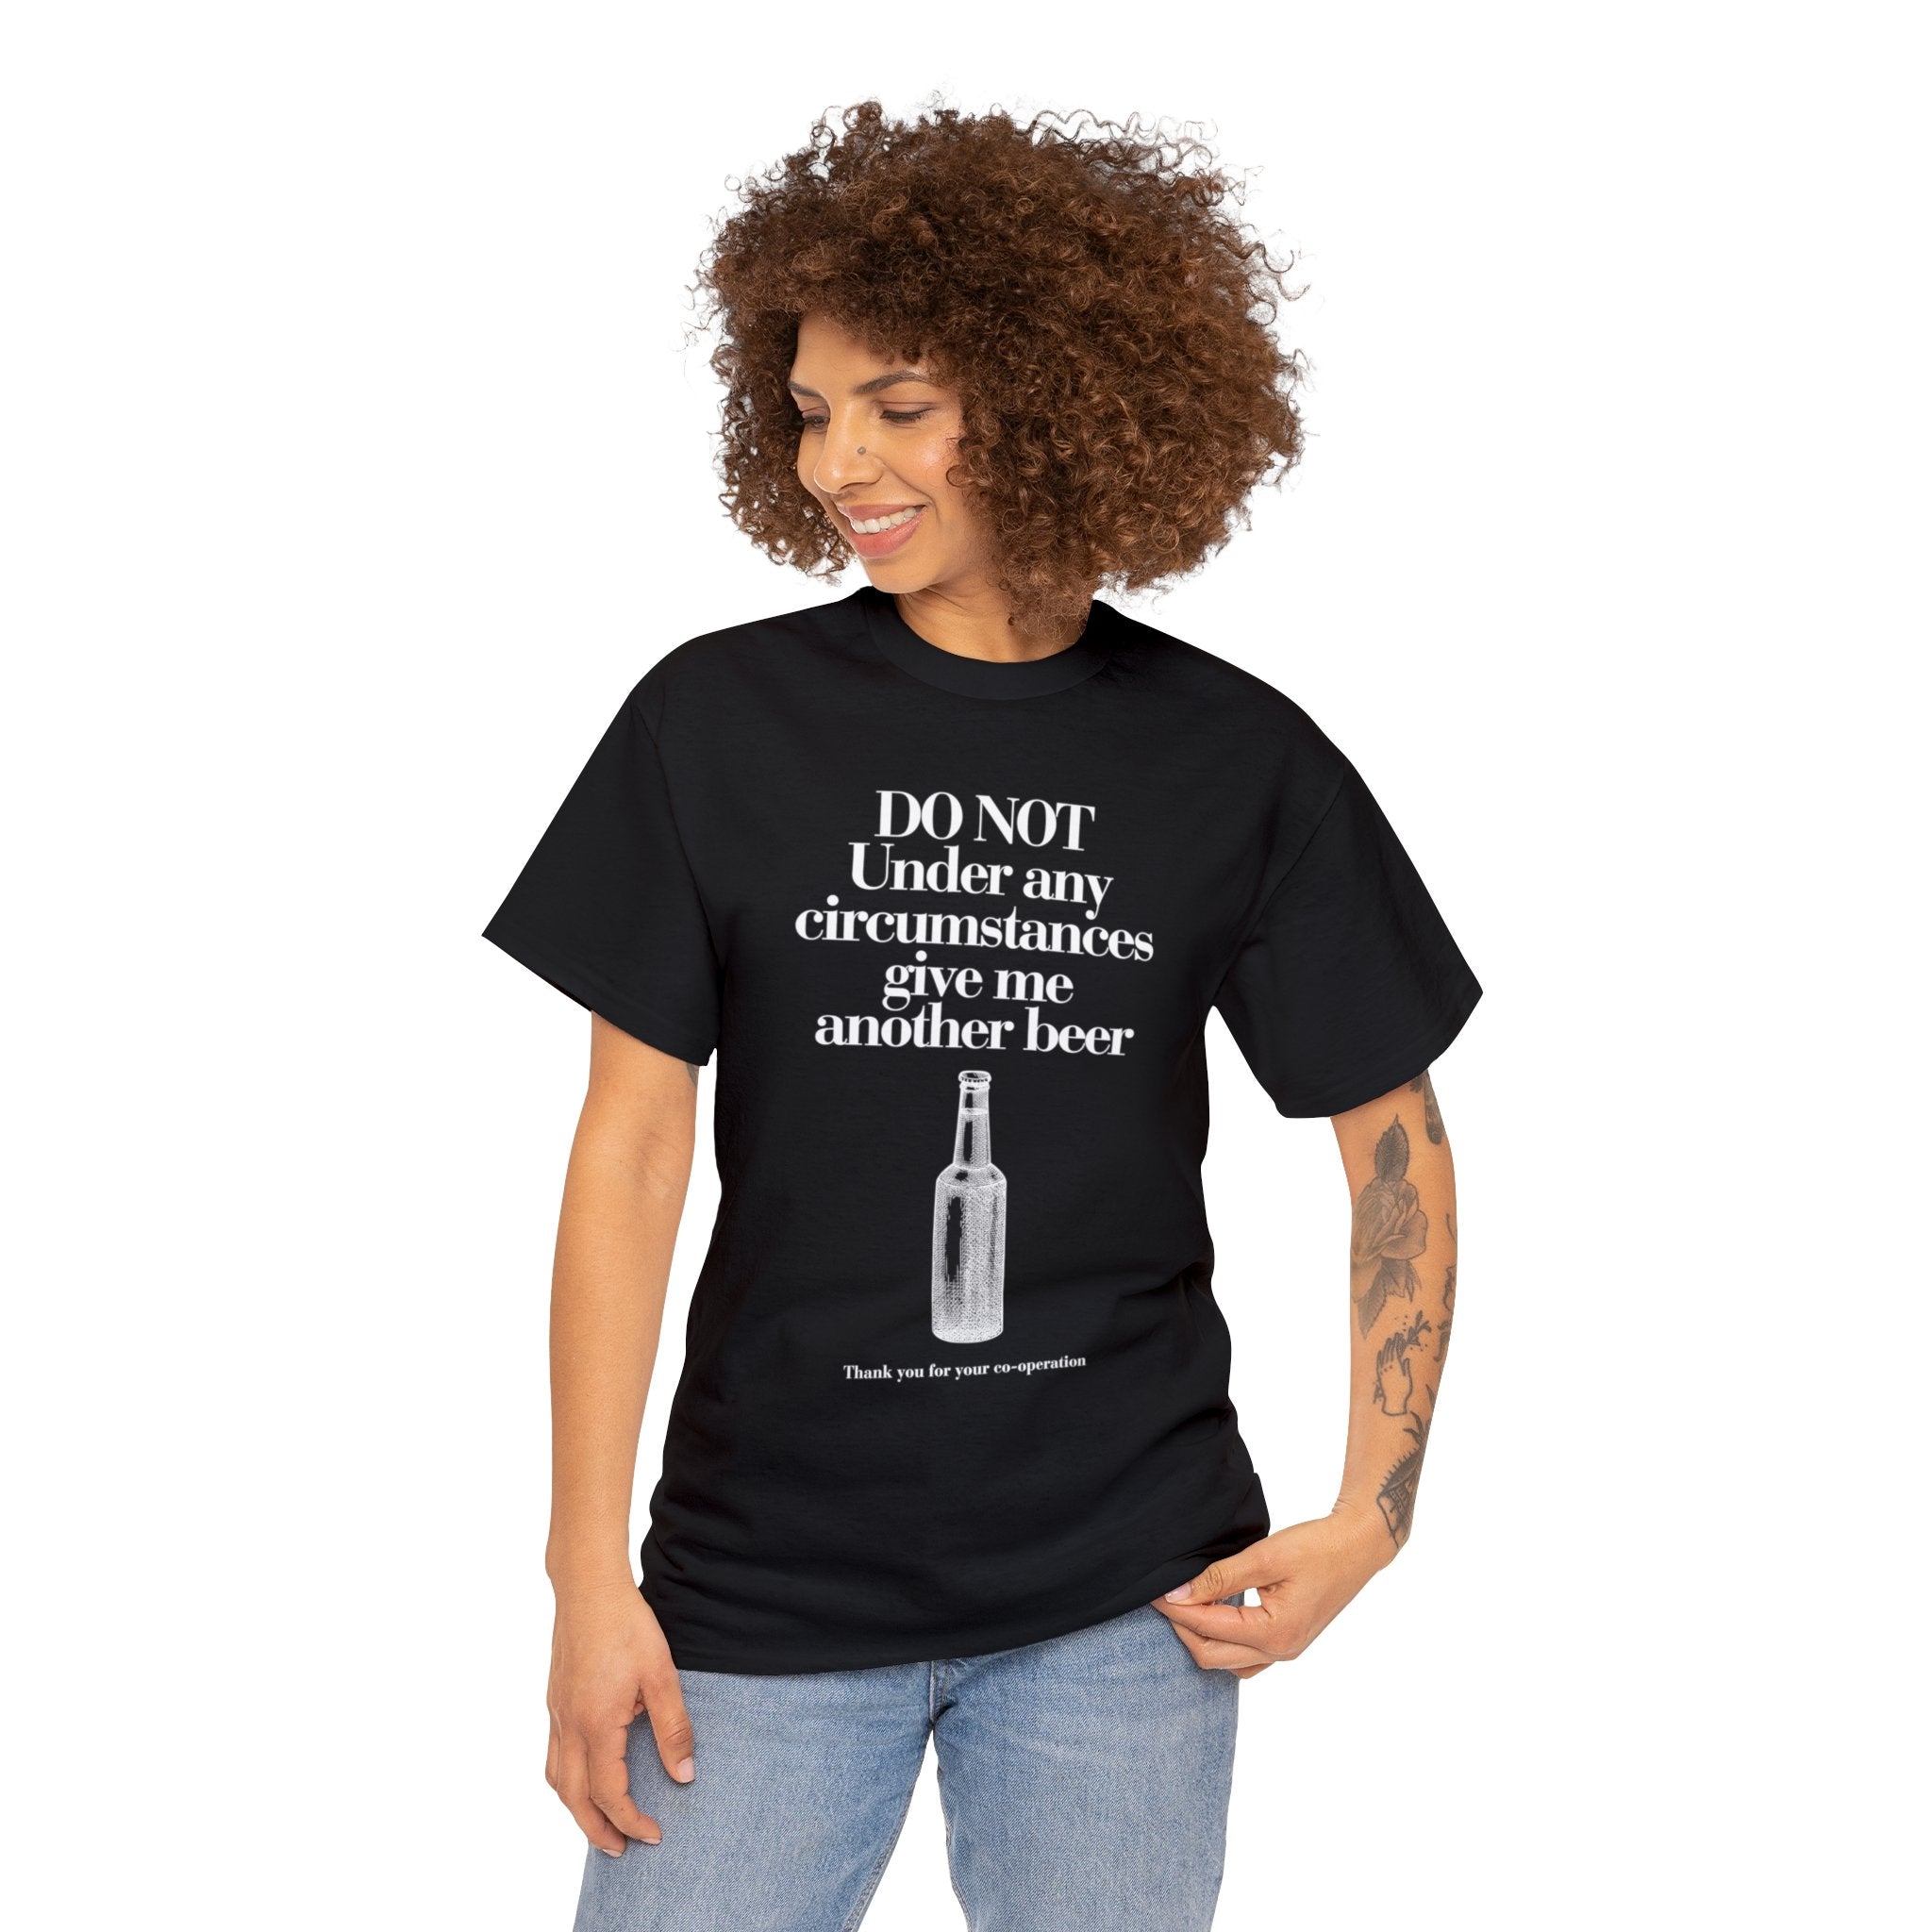 Do not under any circumstances give me another beer - Unisex Heavy Cotton Tee